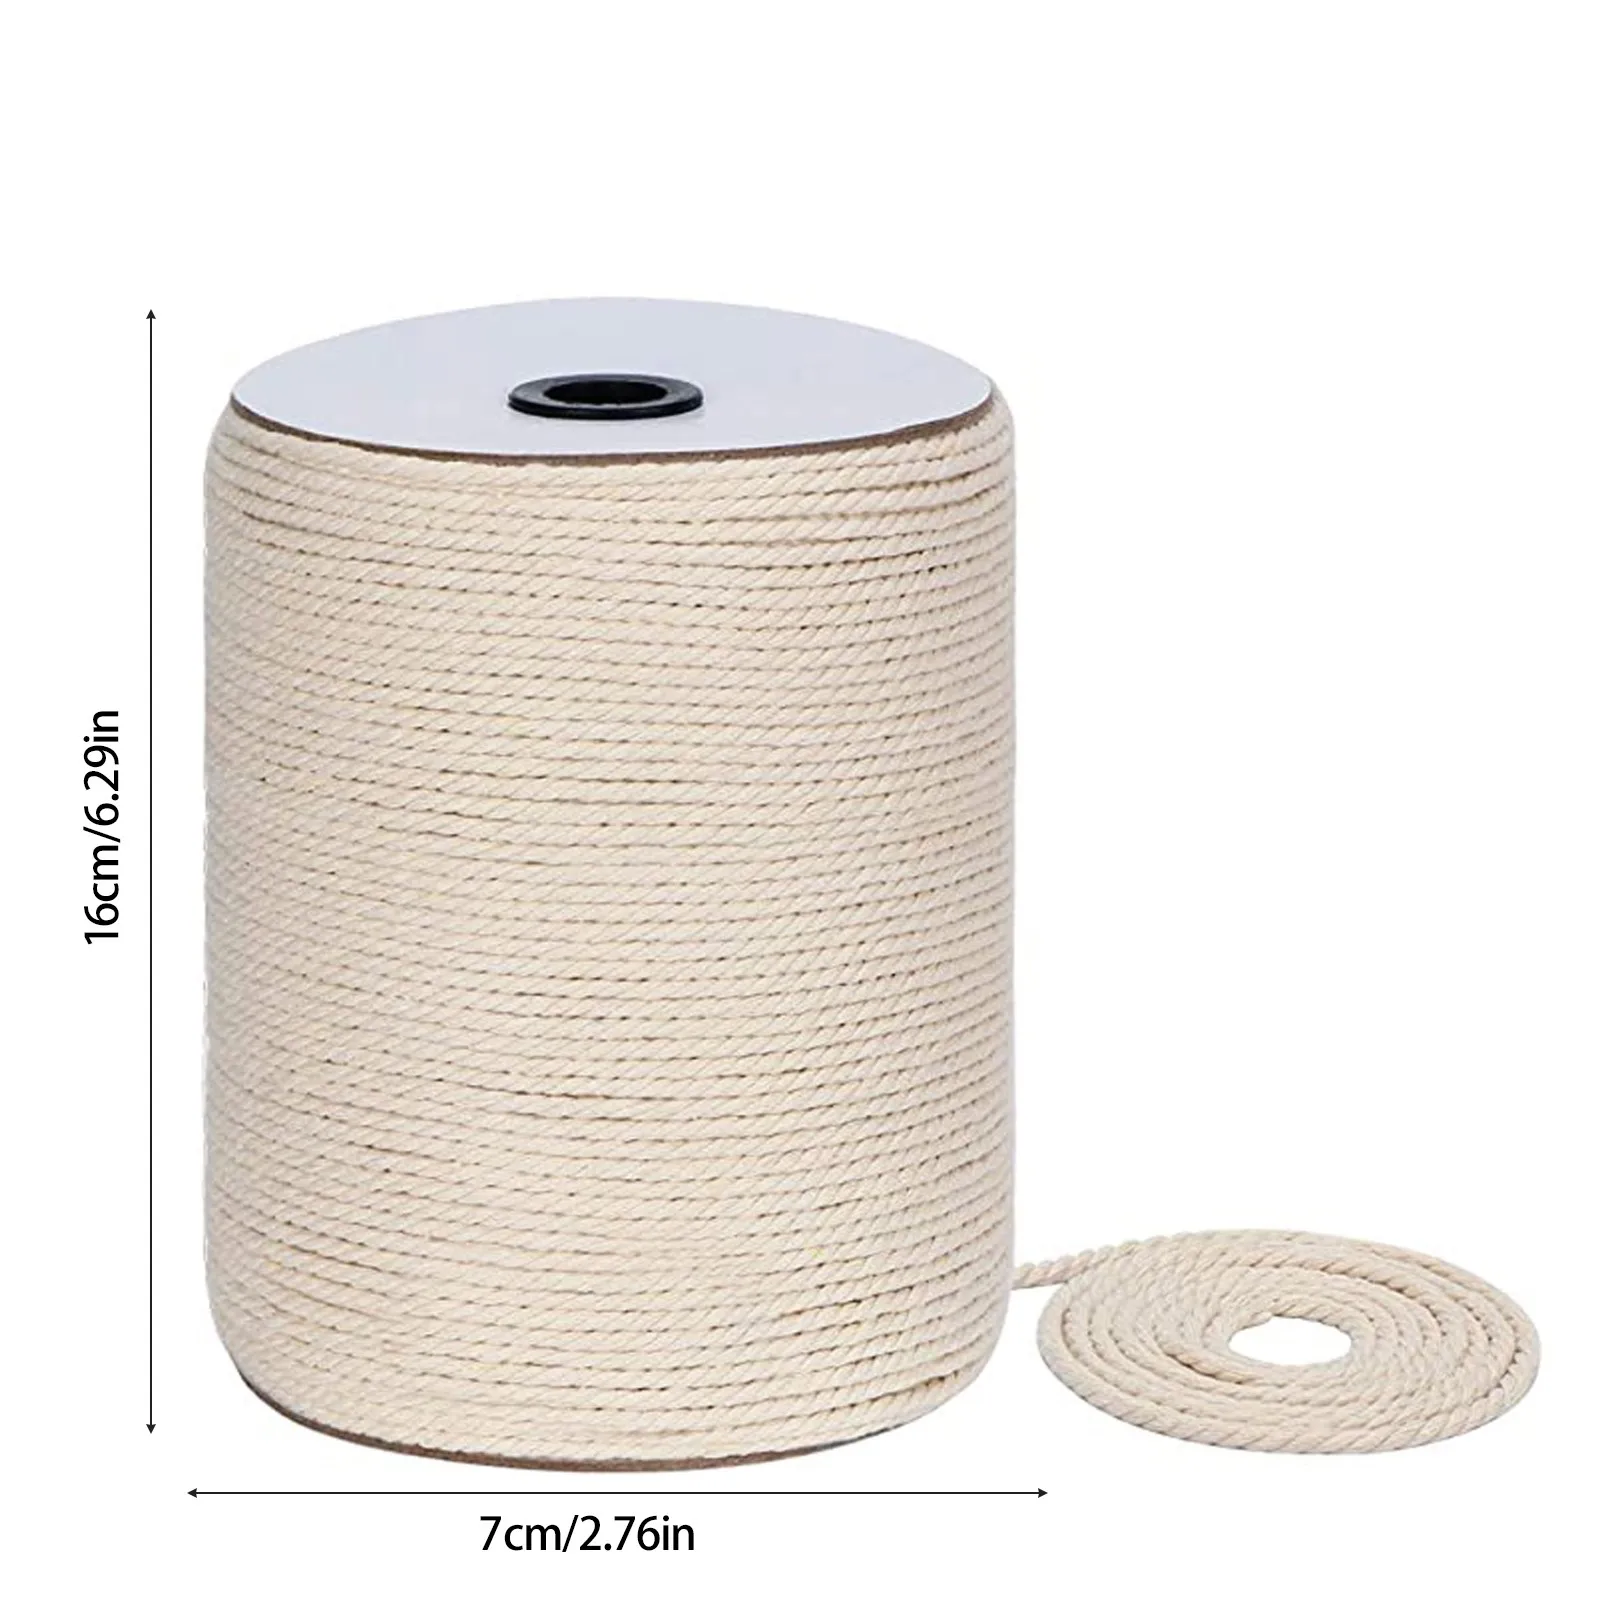 new fiy 3mm x 300m Cotton Rope Multi-purpose Creative Diy Cotton Rope Strands Twisted Macrame Cotton Cord for Wall Hanging Craft